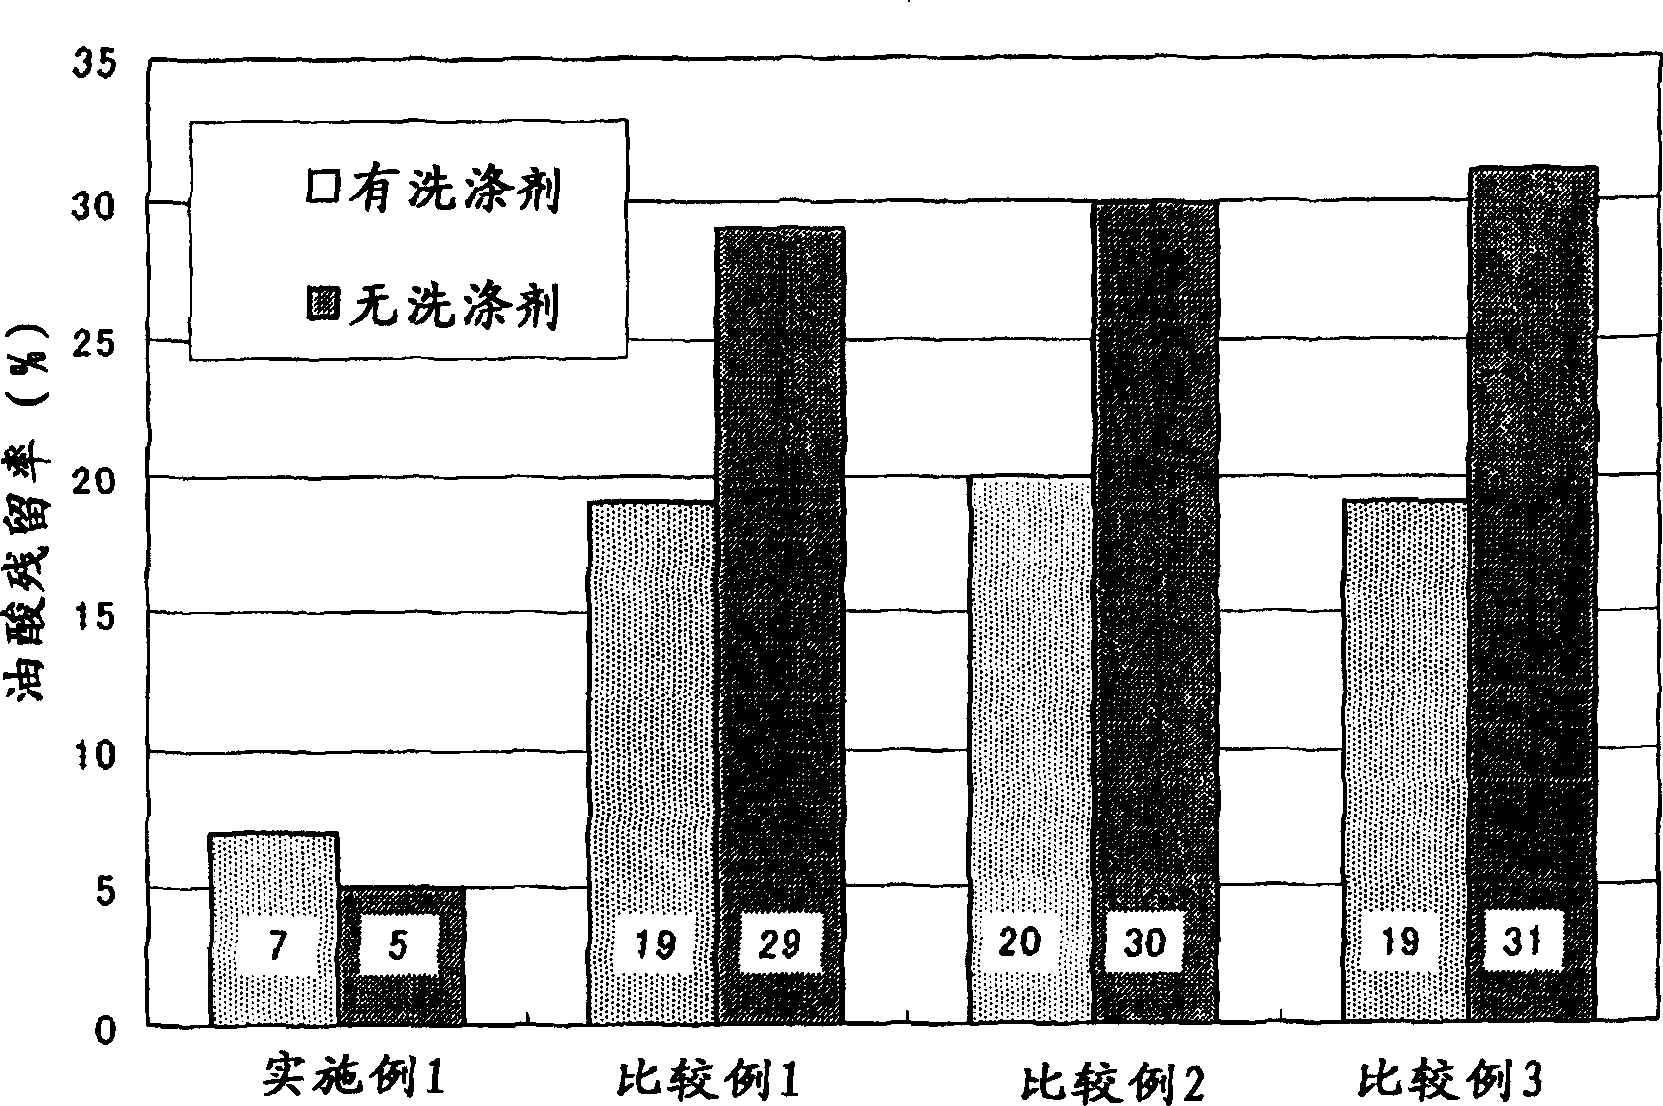 Anti-pollution fiber structure and its processing method